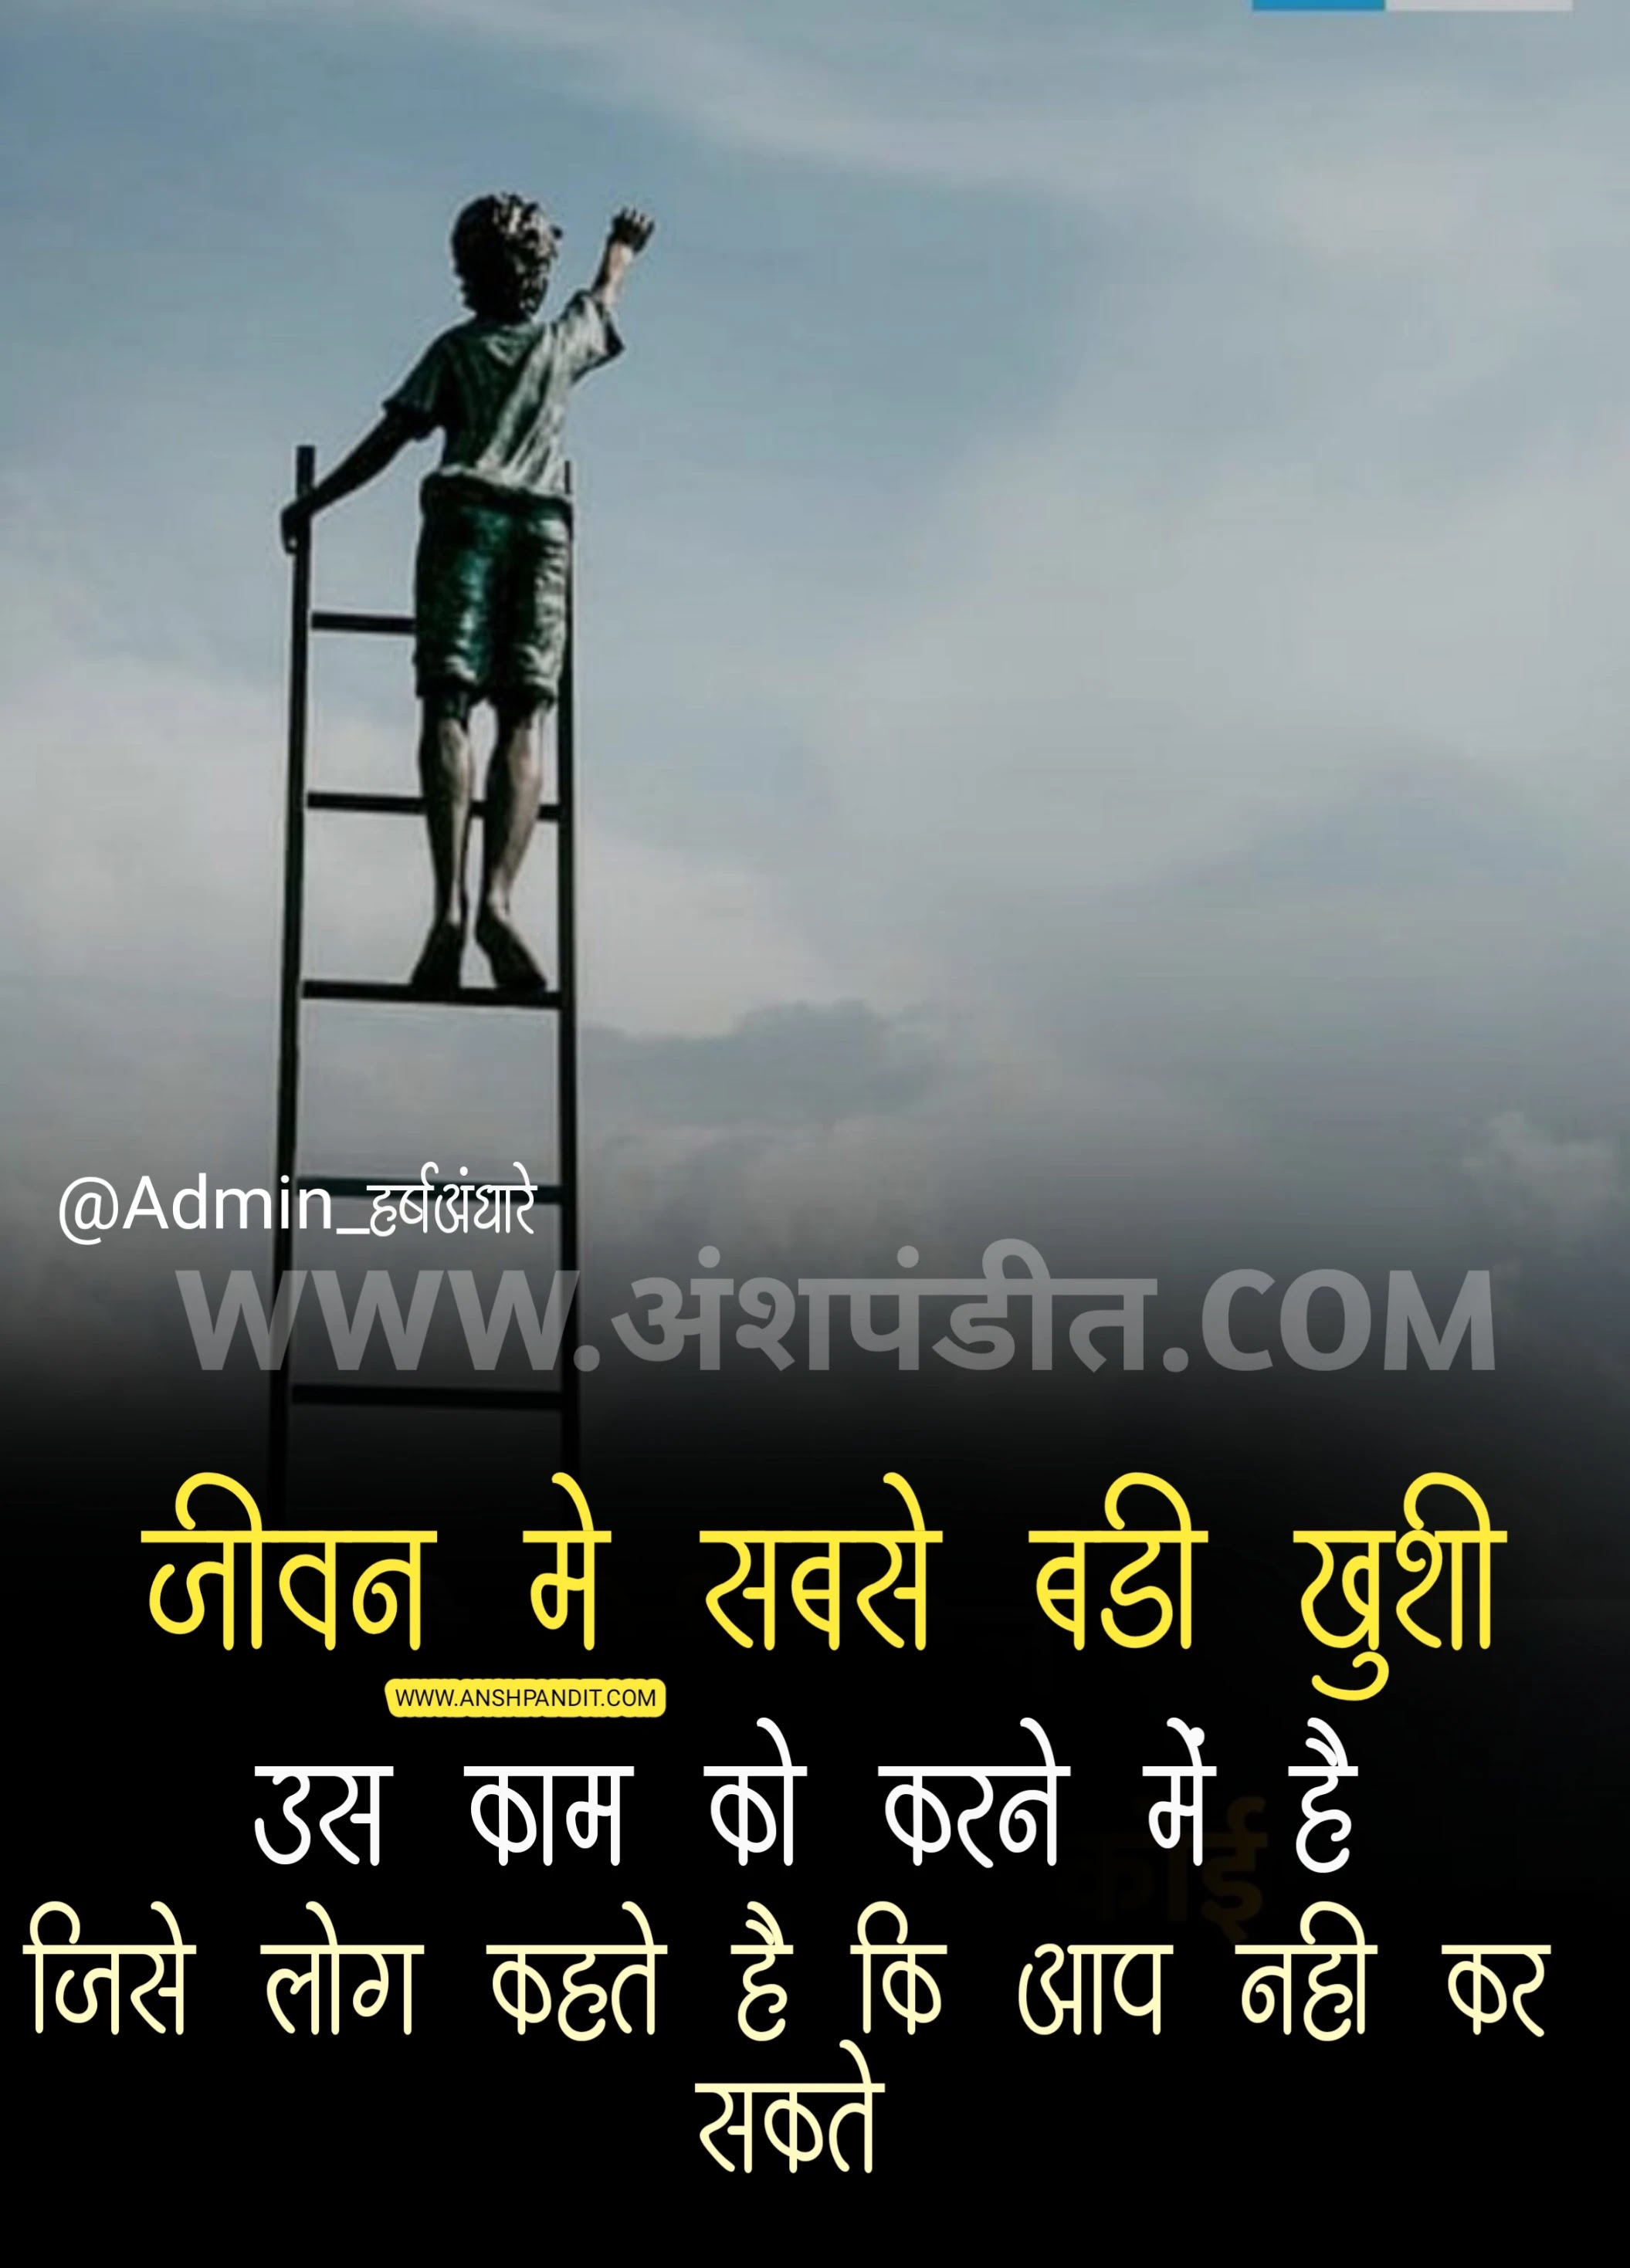 Motivational Quotes for Whatsapp Dp in Hindi